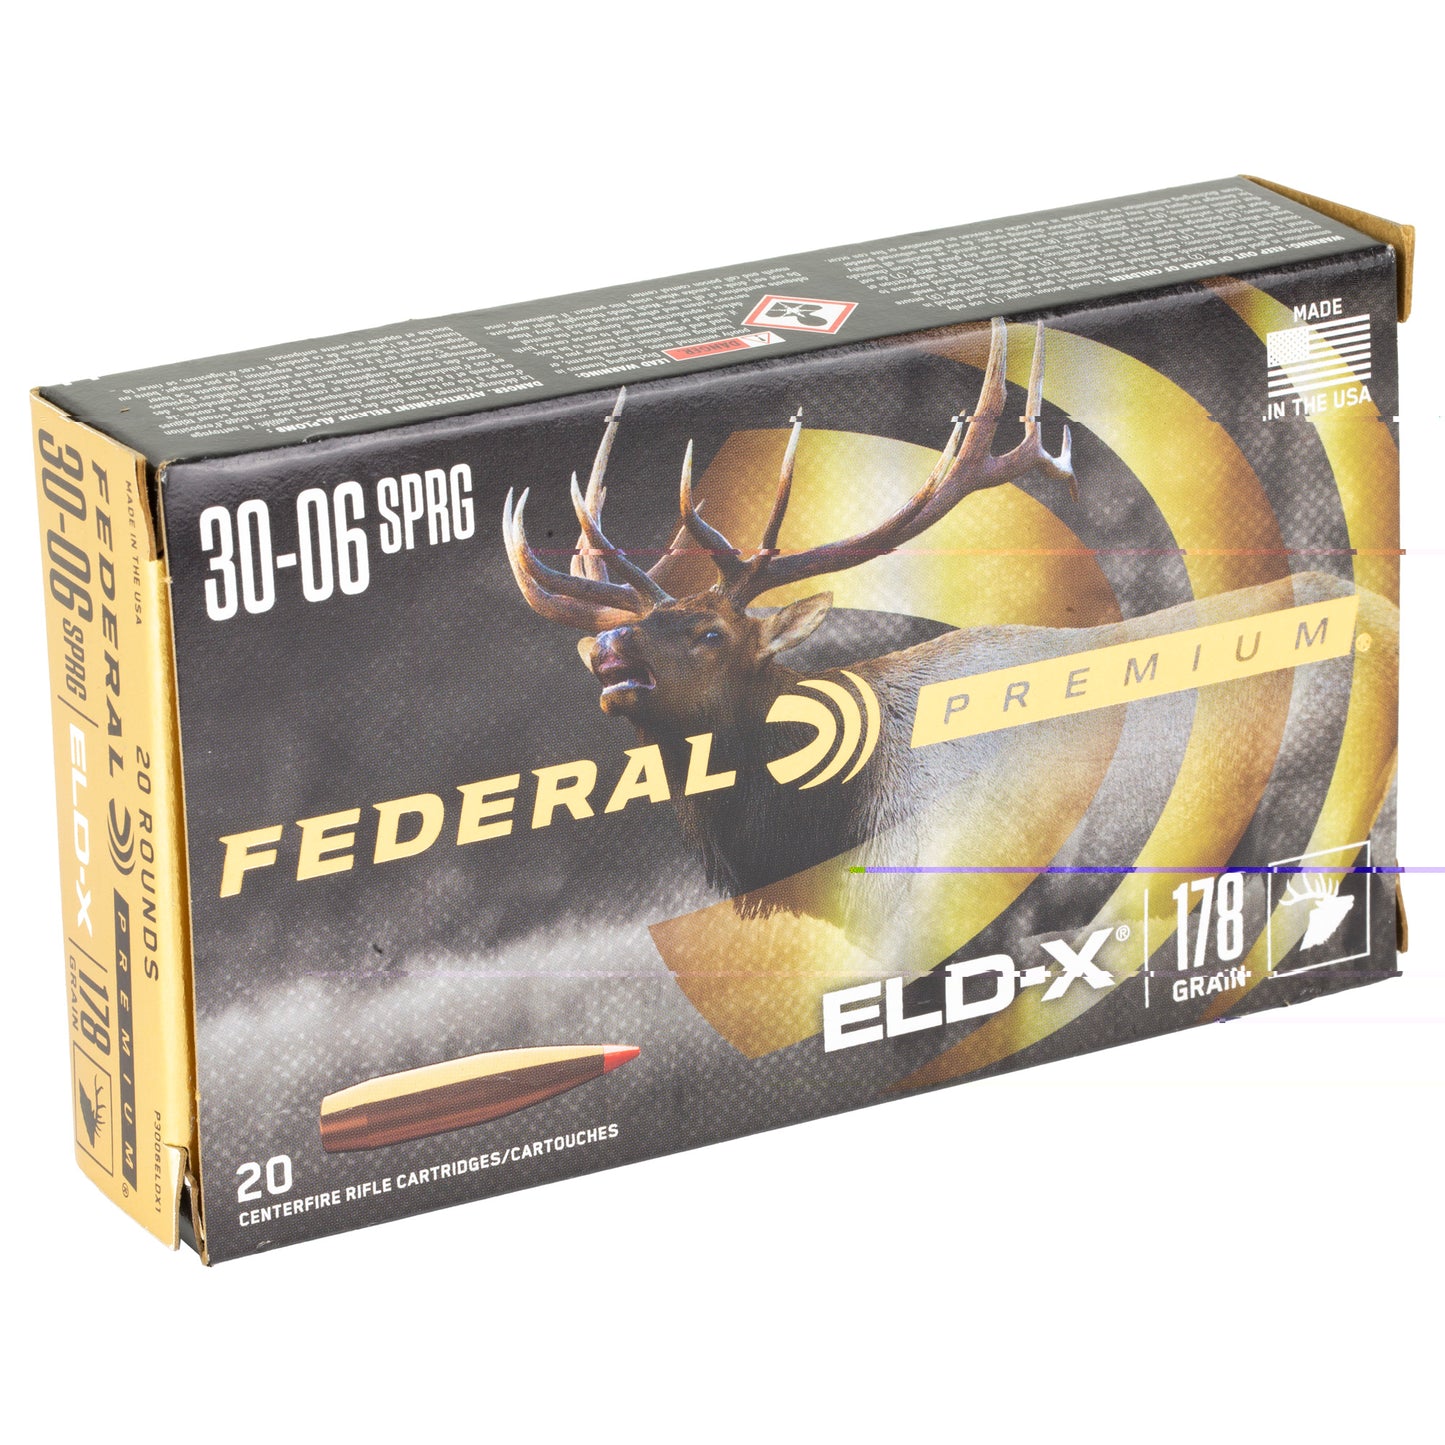 Federal, Federal Premium, Extremely Low Drag eXpanding, 30-06 Springfield, 178 Grain, Polymer Tip, 20 Rounds